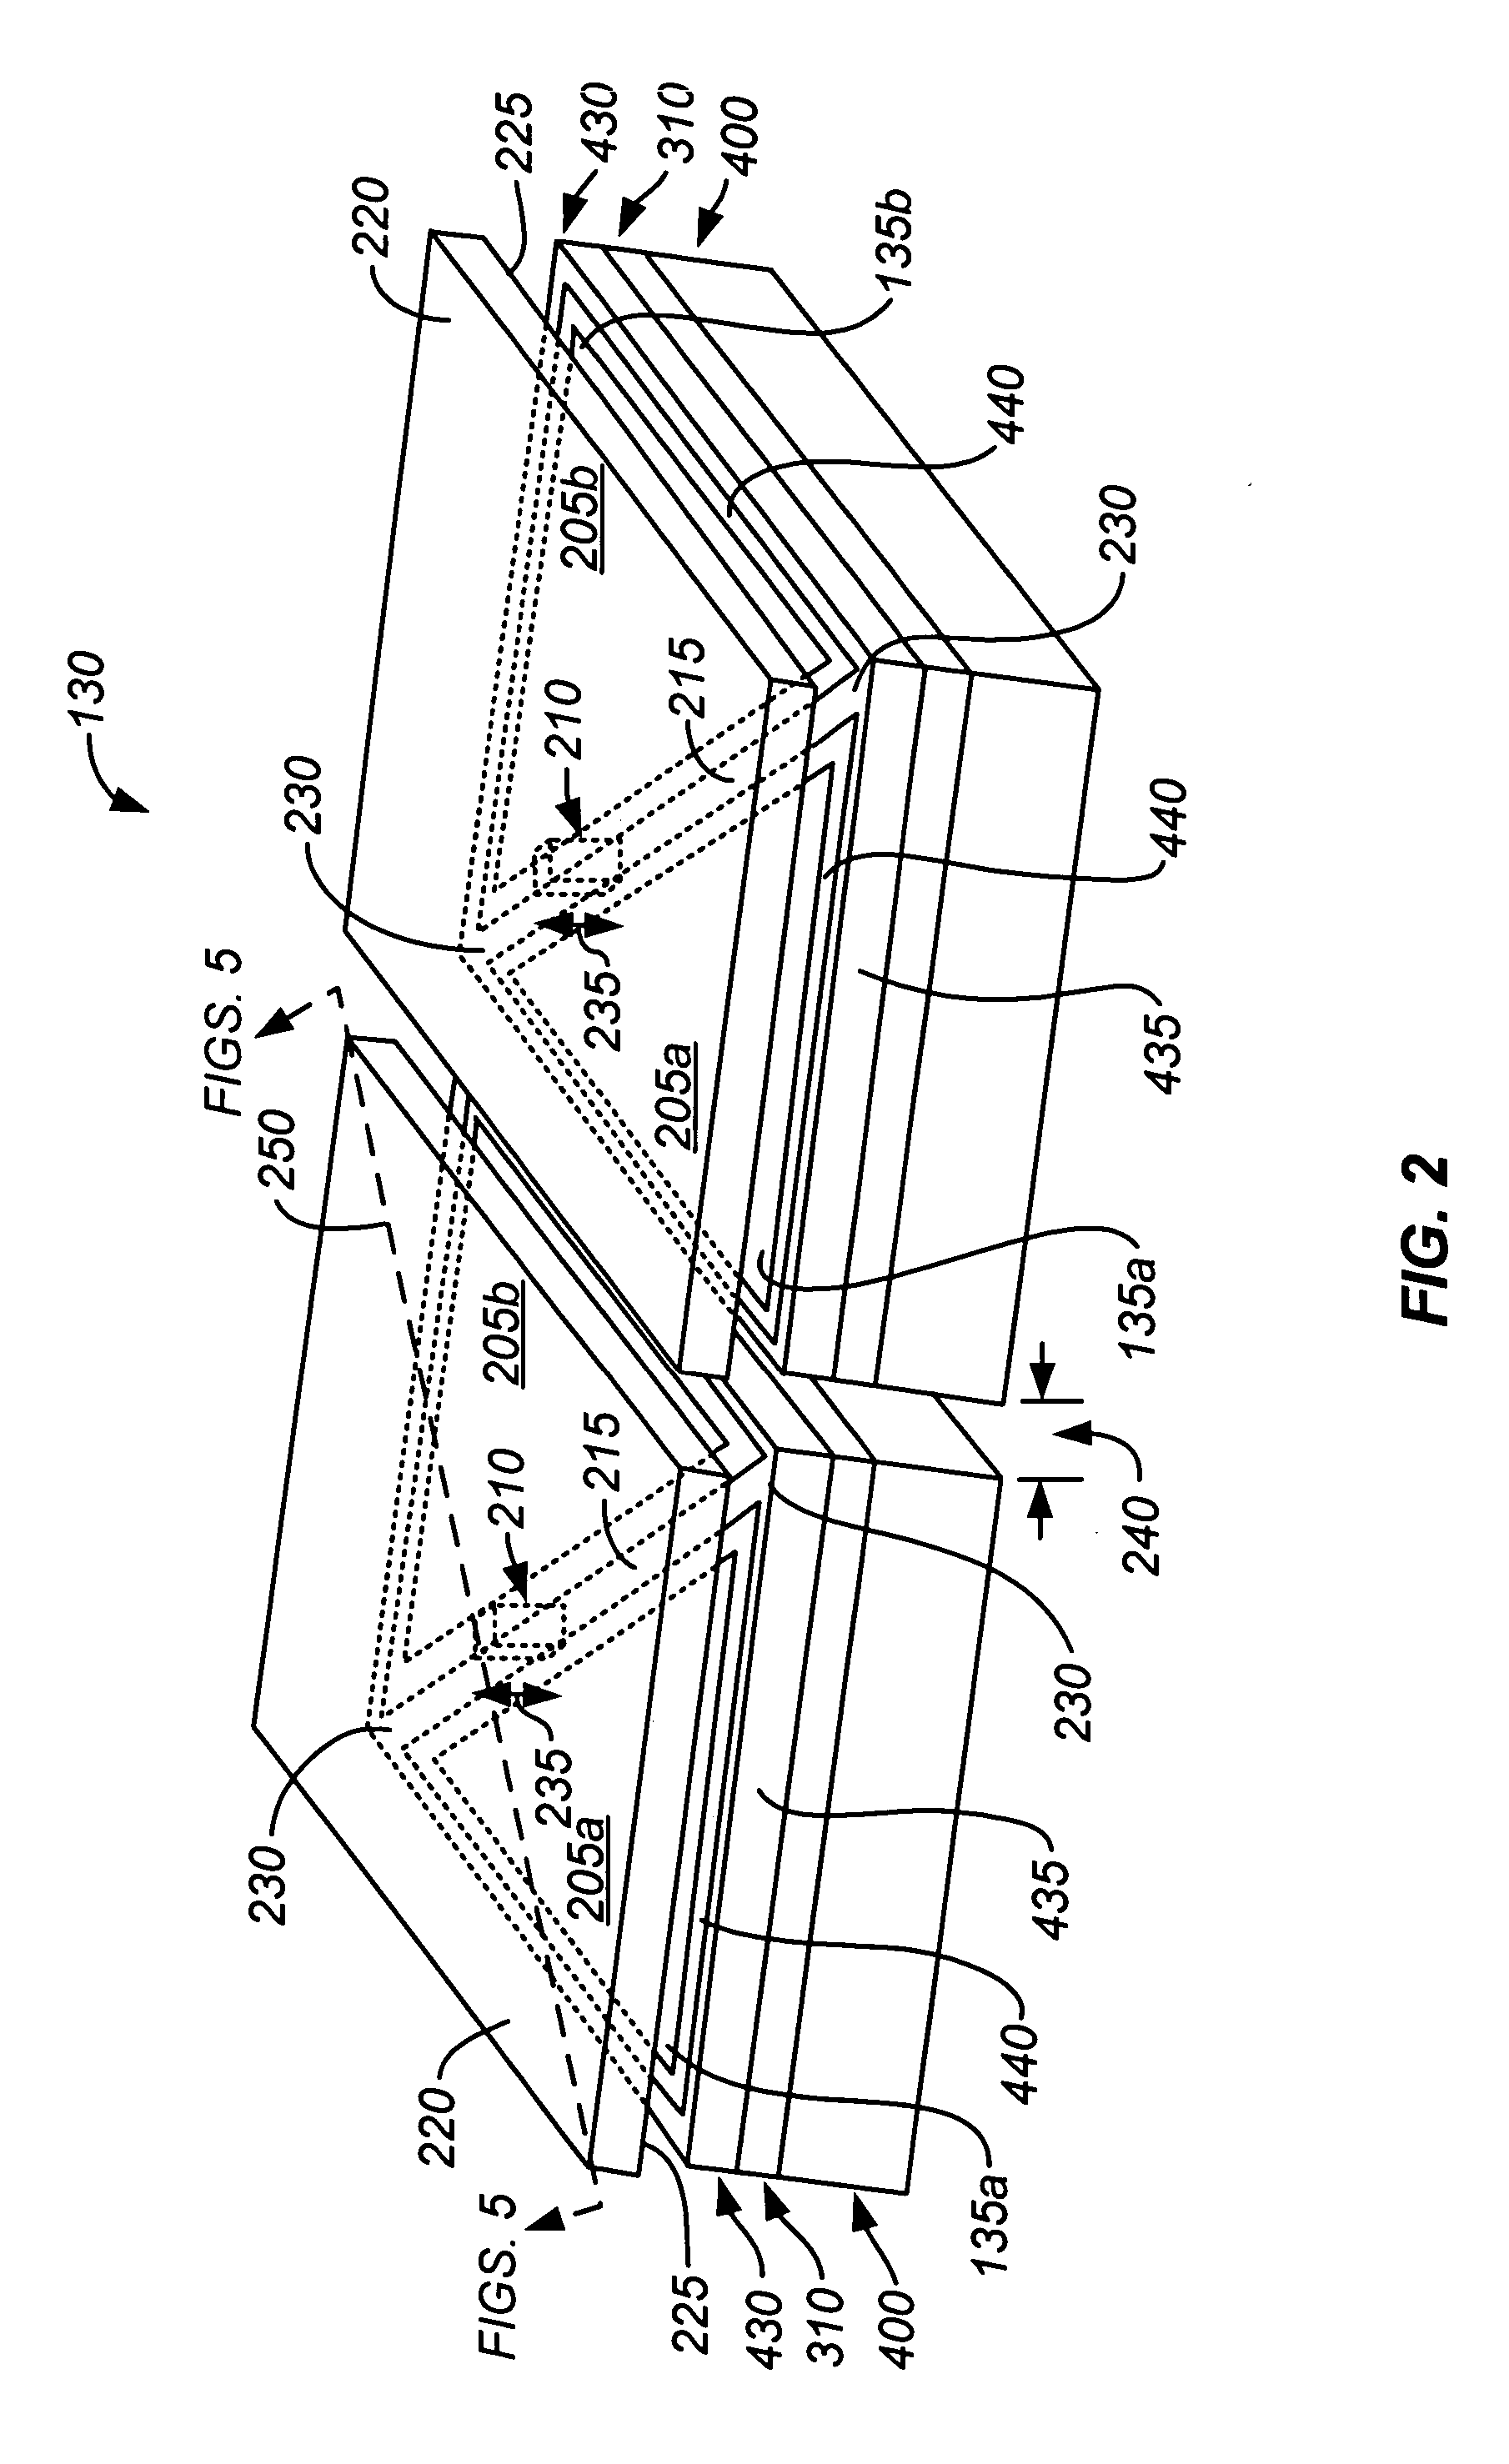 Mirror structure with single crystal silicon cross-member